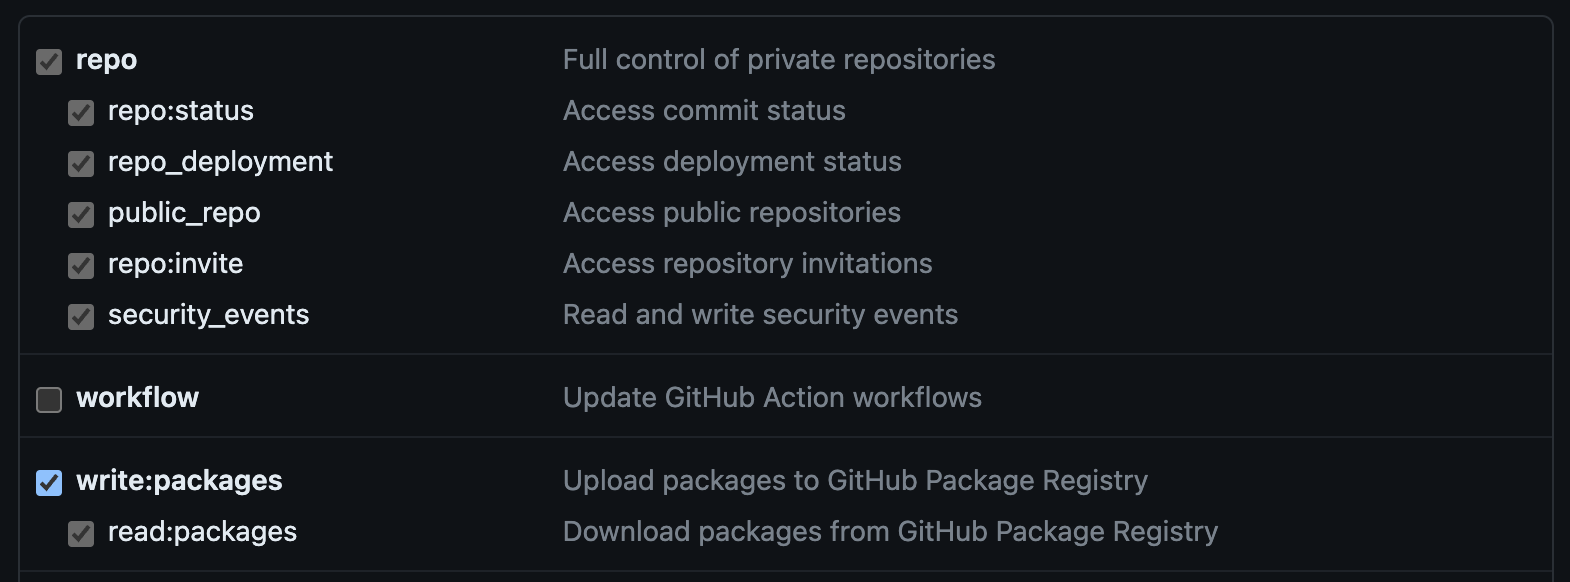 _images/gh_token_permissions.png